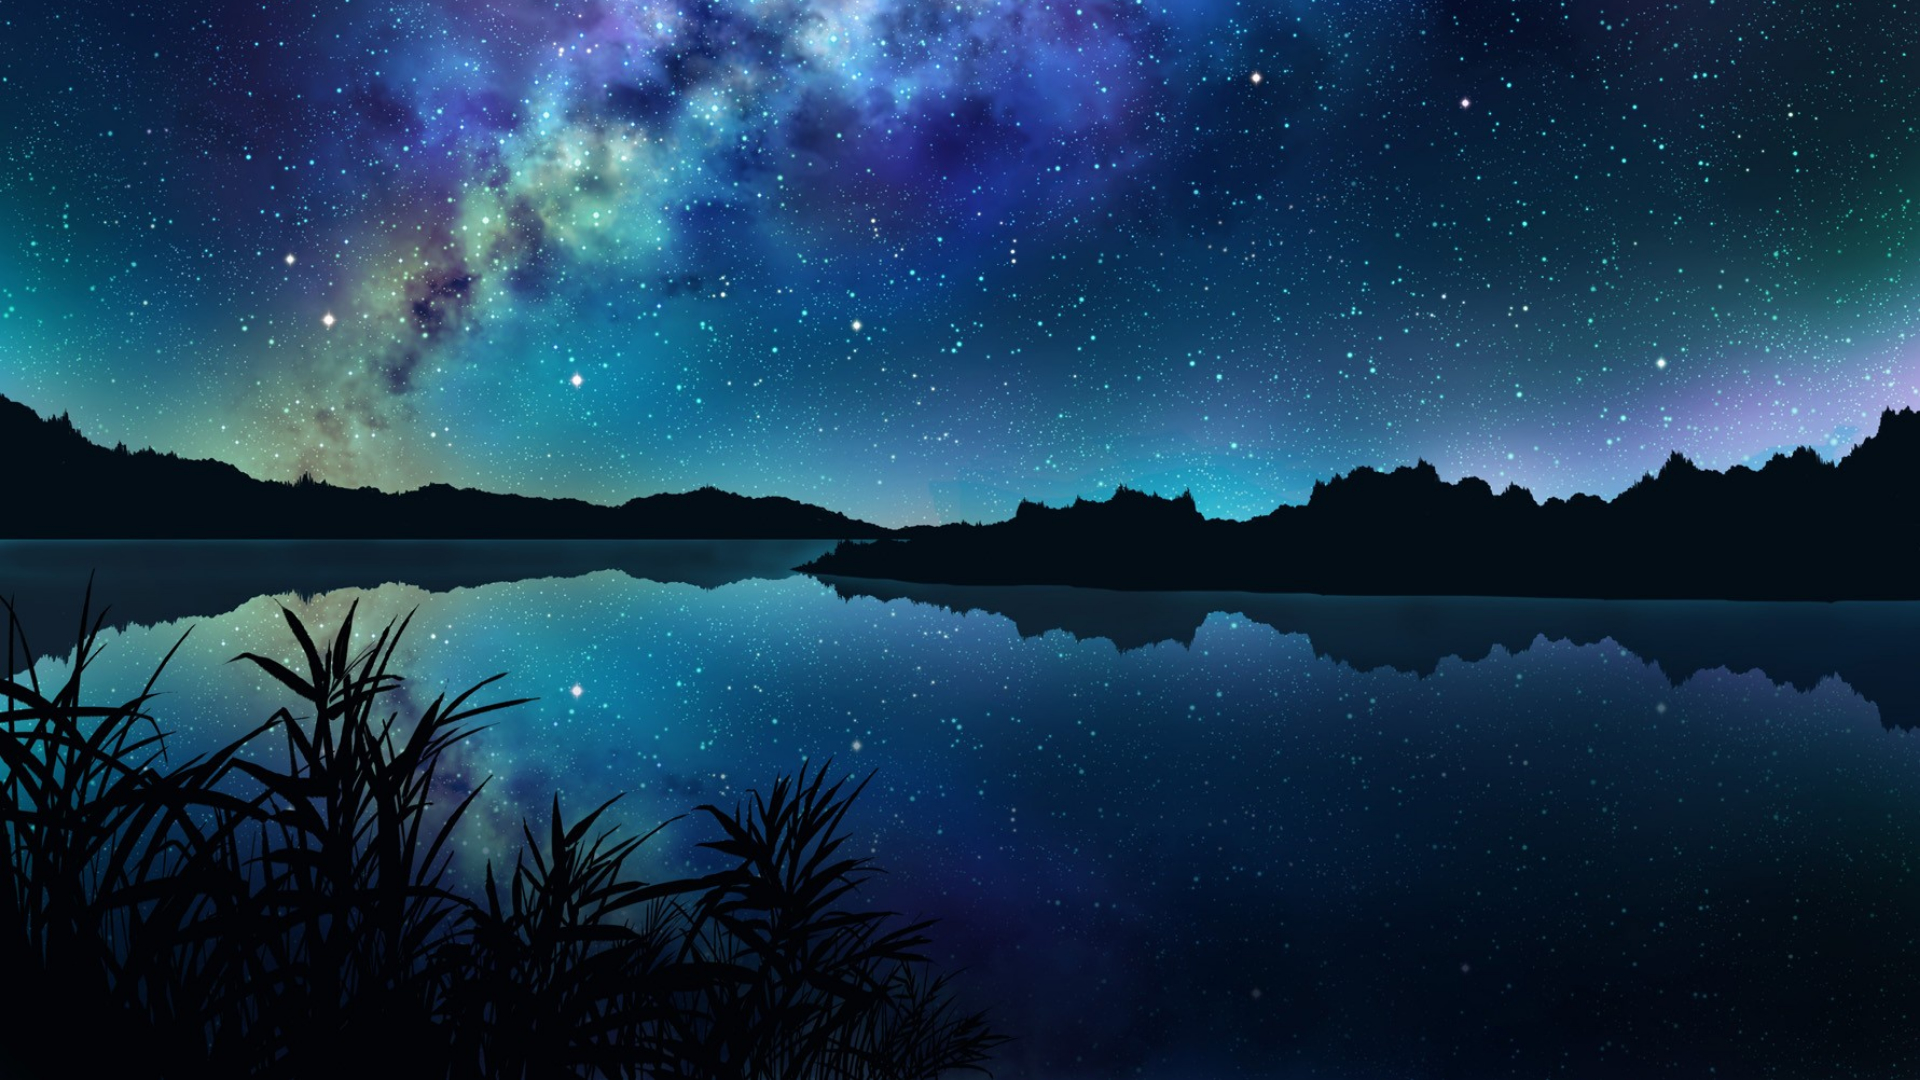 Amazing Starry Night Over Mountains and River Wallpaper, HD Nature 4K